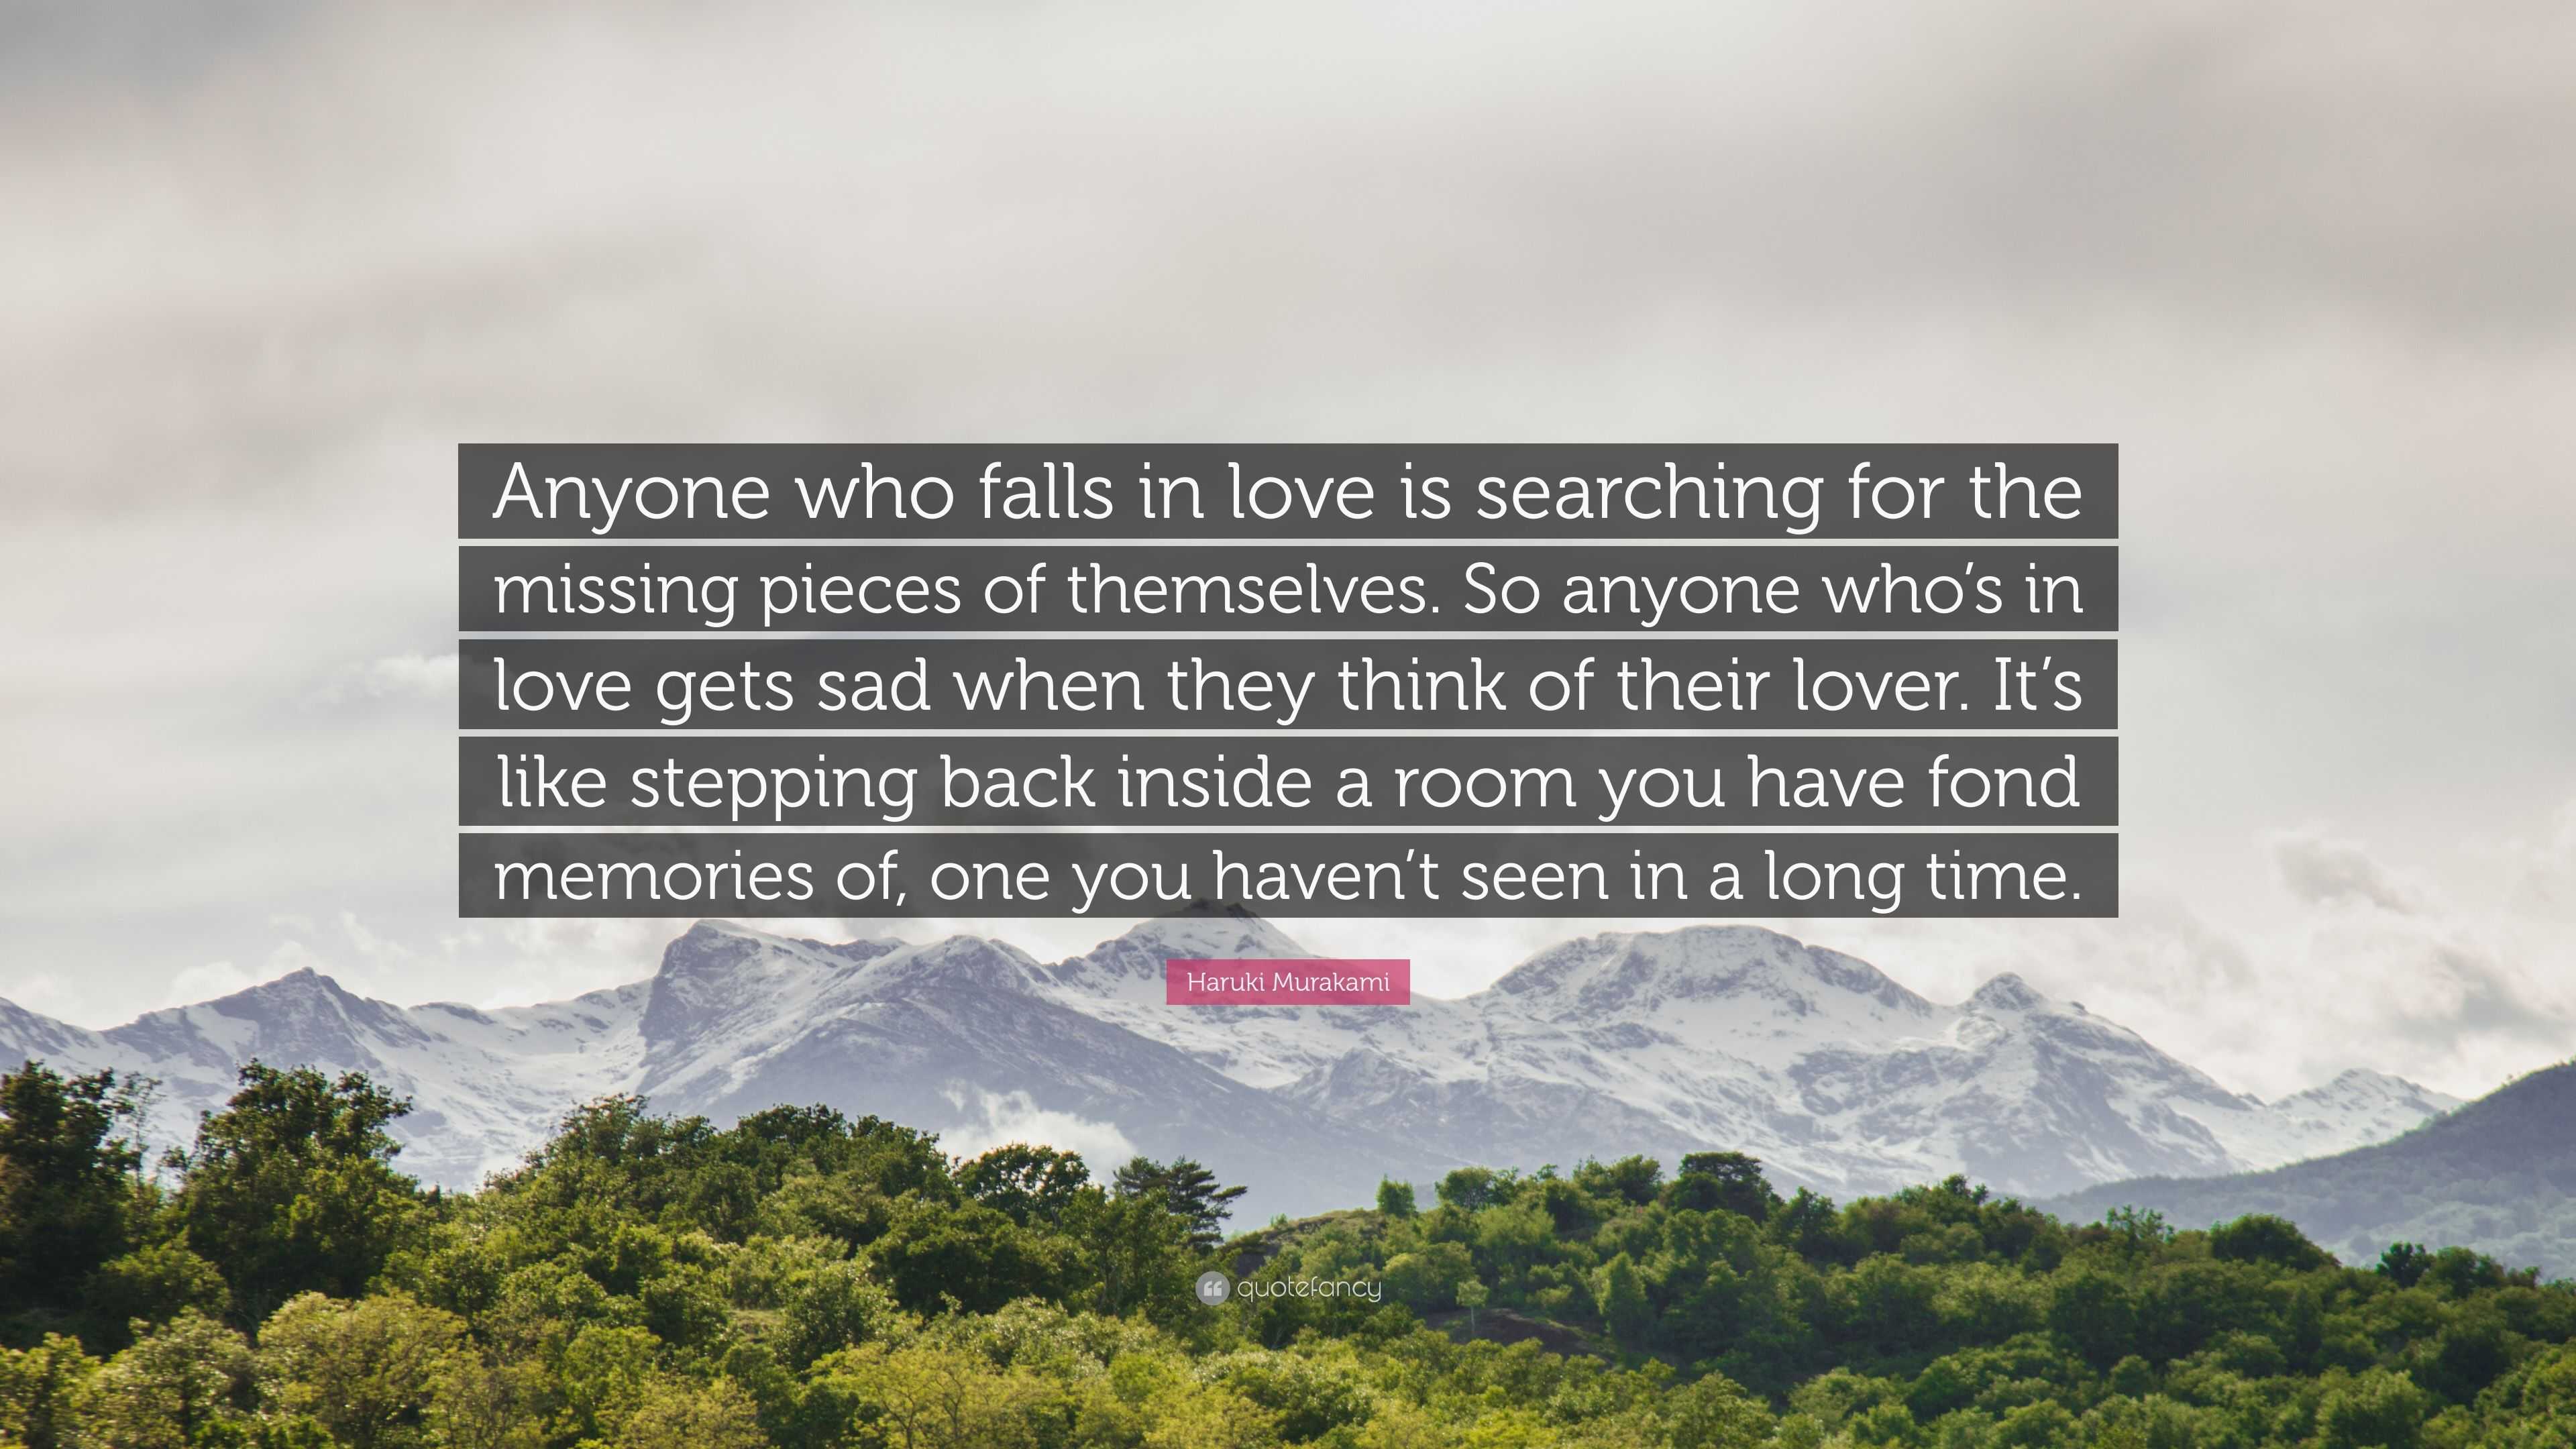 Haruki Murakami Quote “Anyone who falls in love is searching for the missing pieces